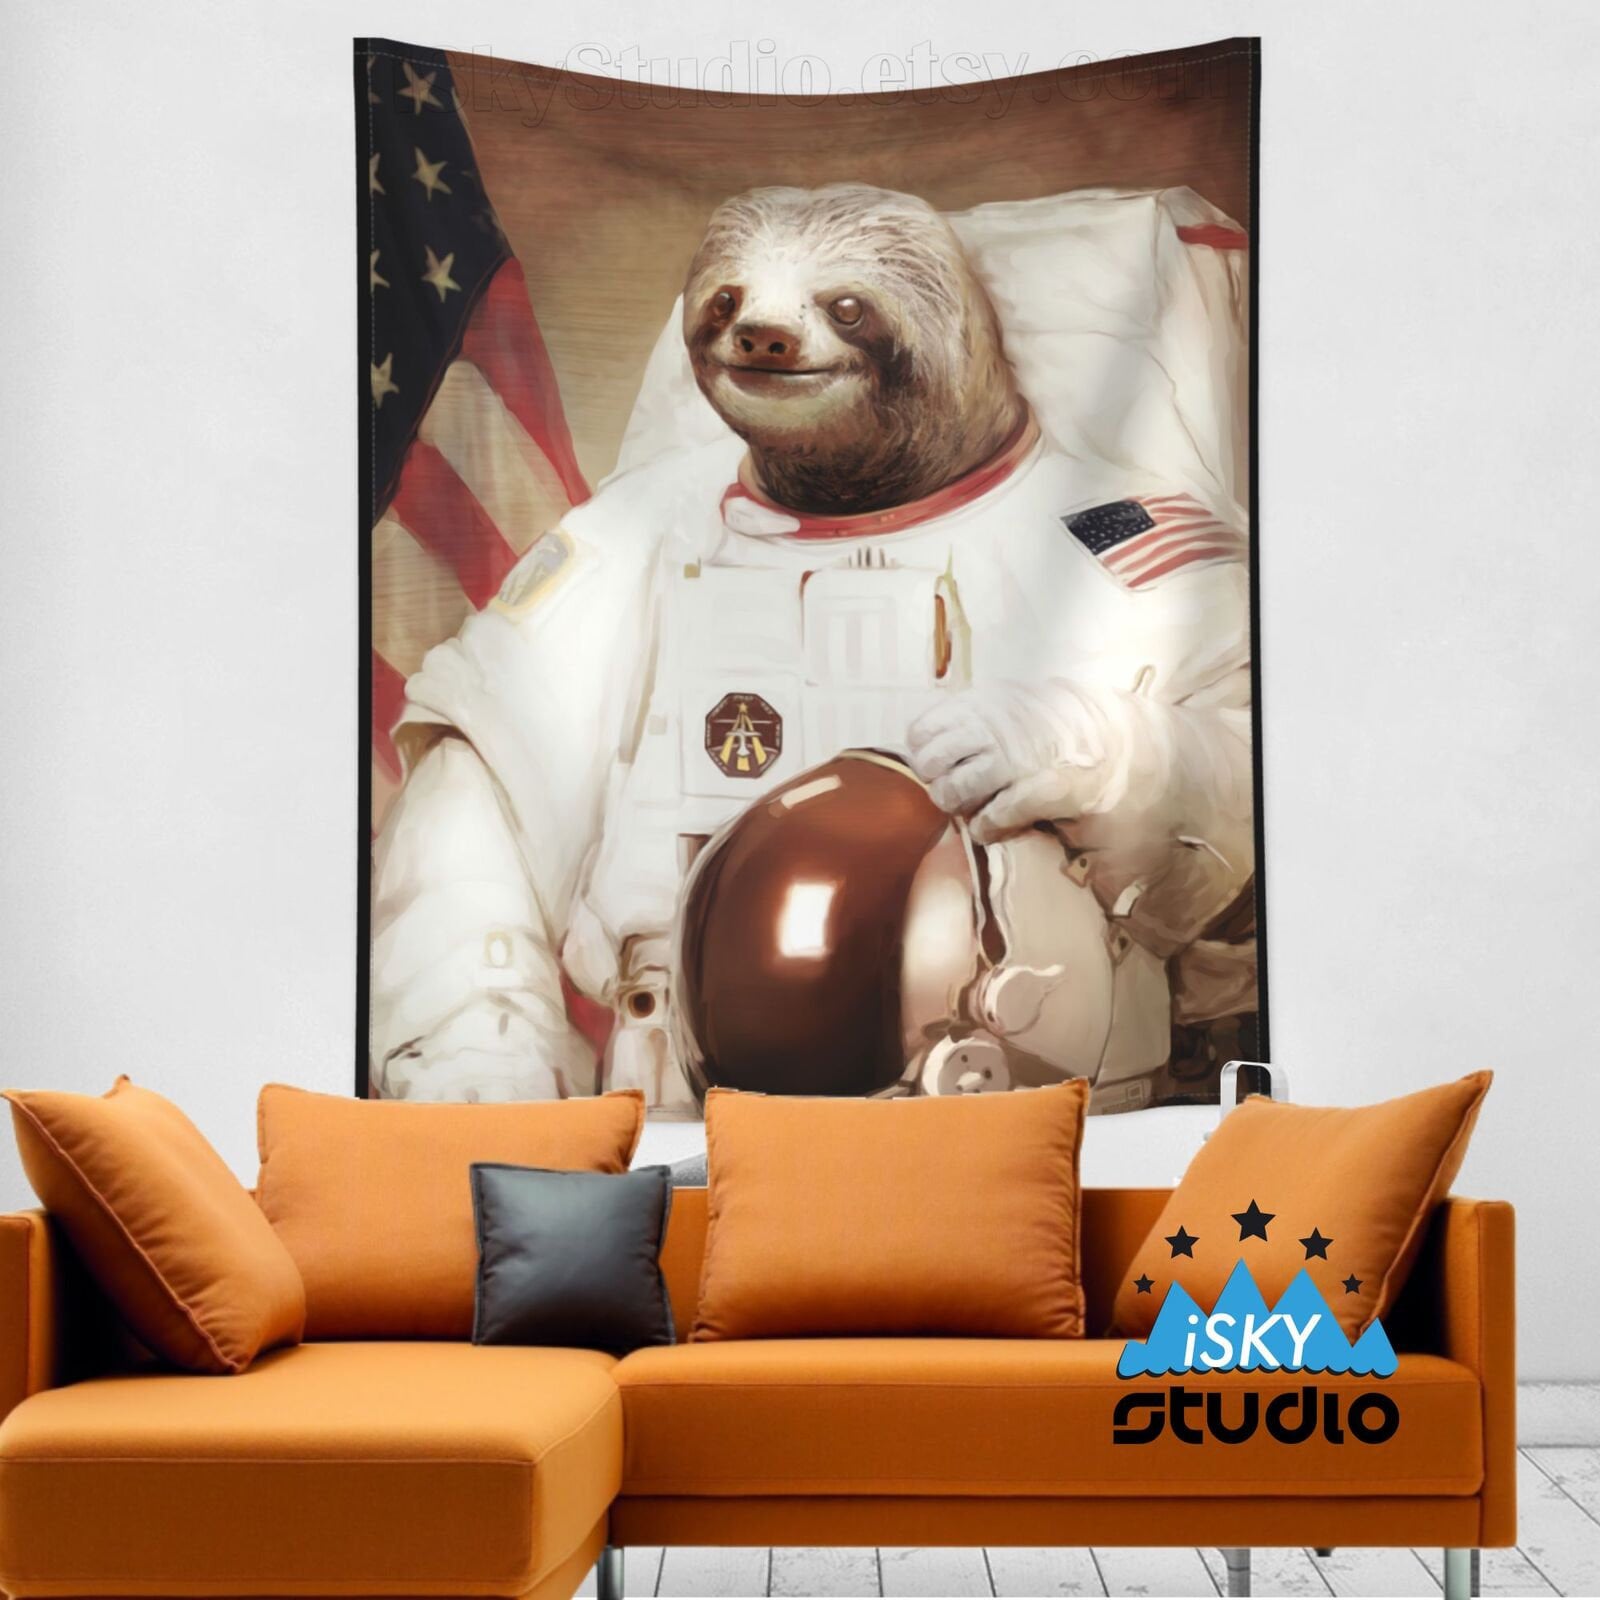 sloth wearing a space suit